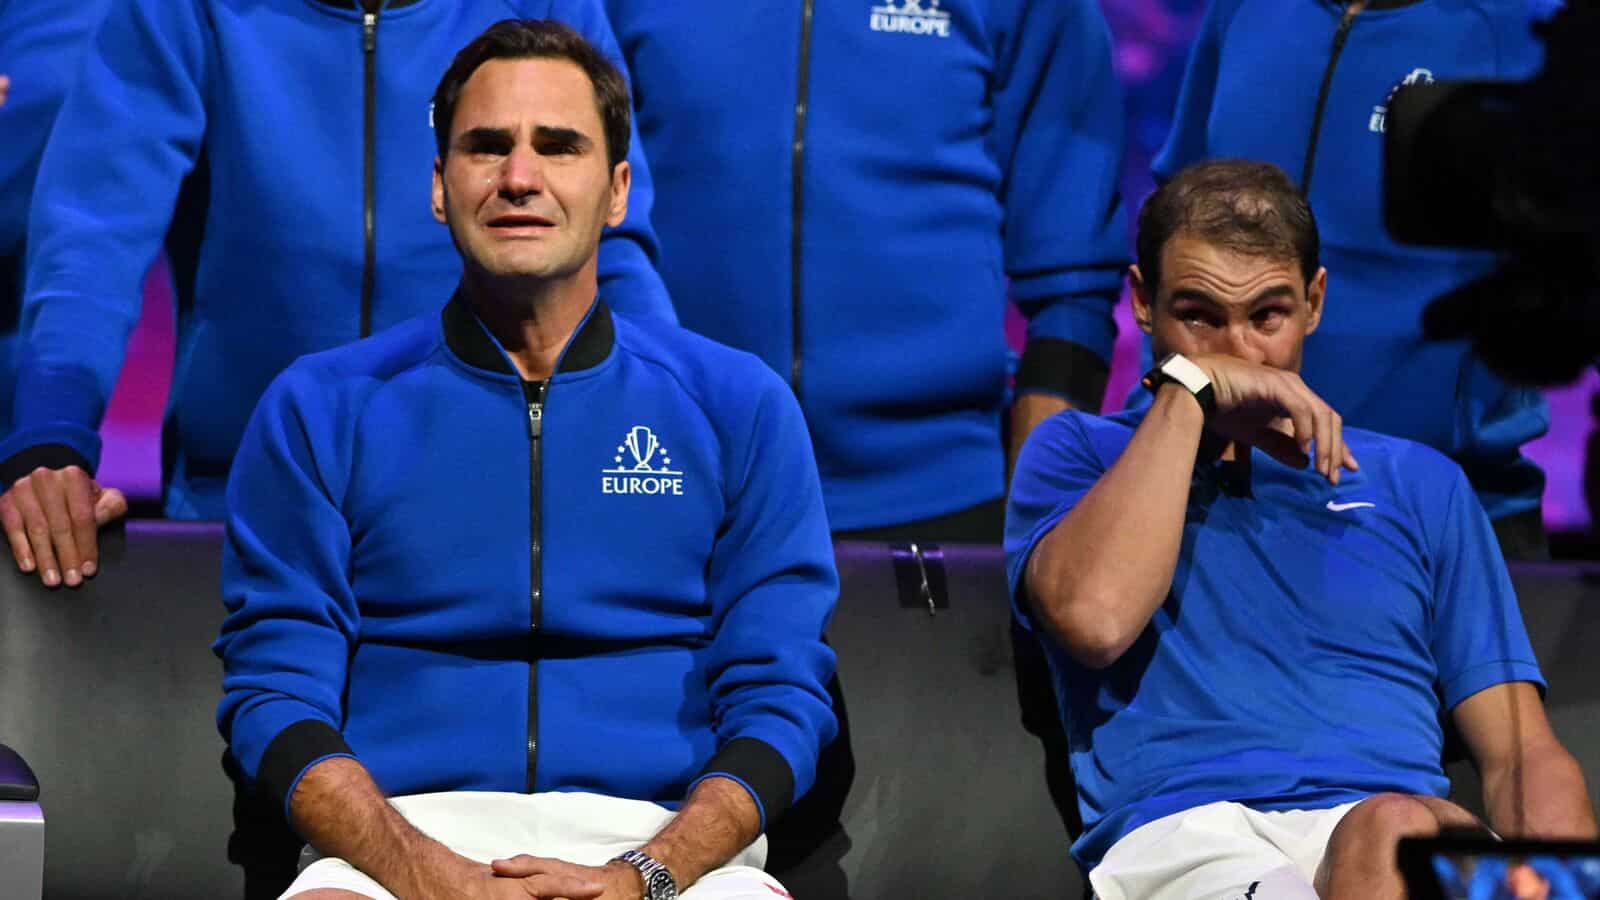 Rafael Nadal withdraws from Laver Cup after doubles with Federer, cites personal reasons